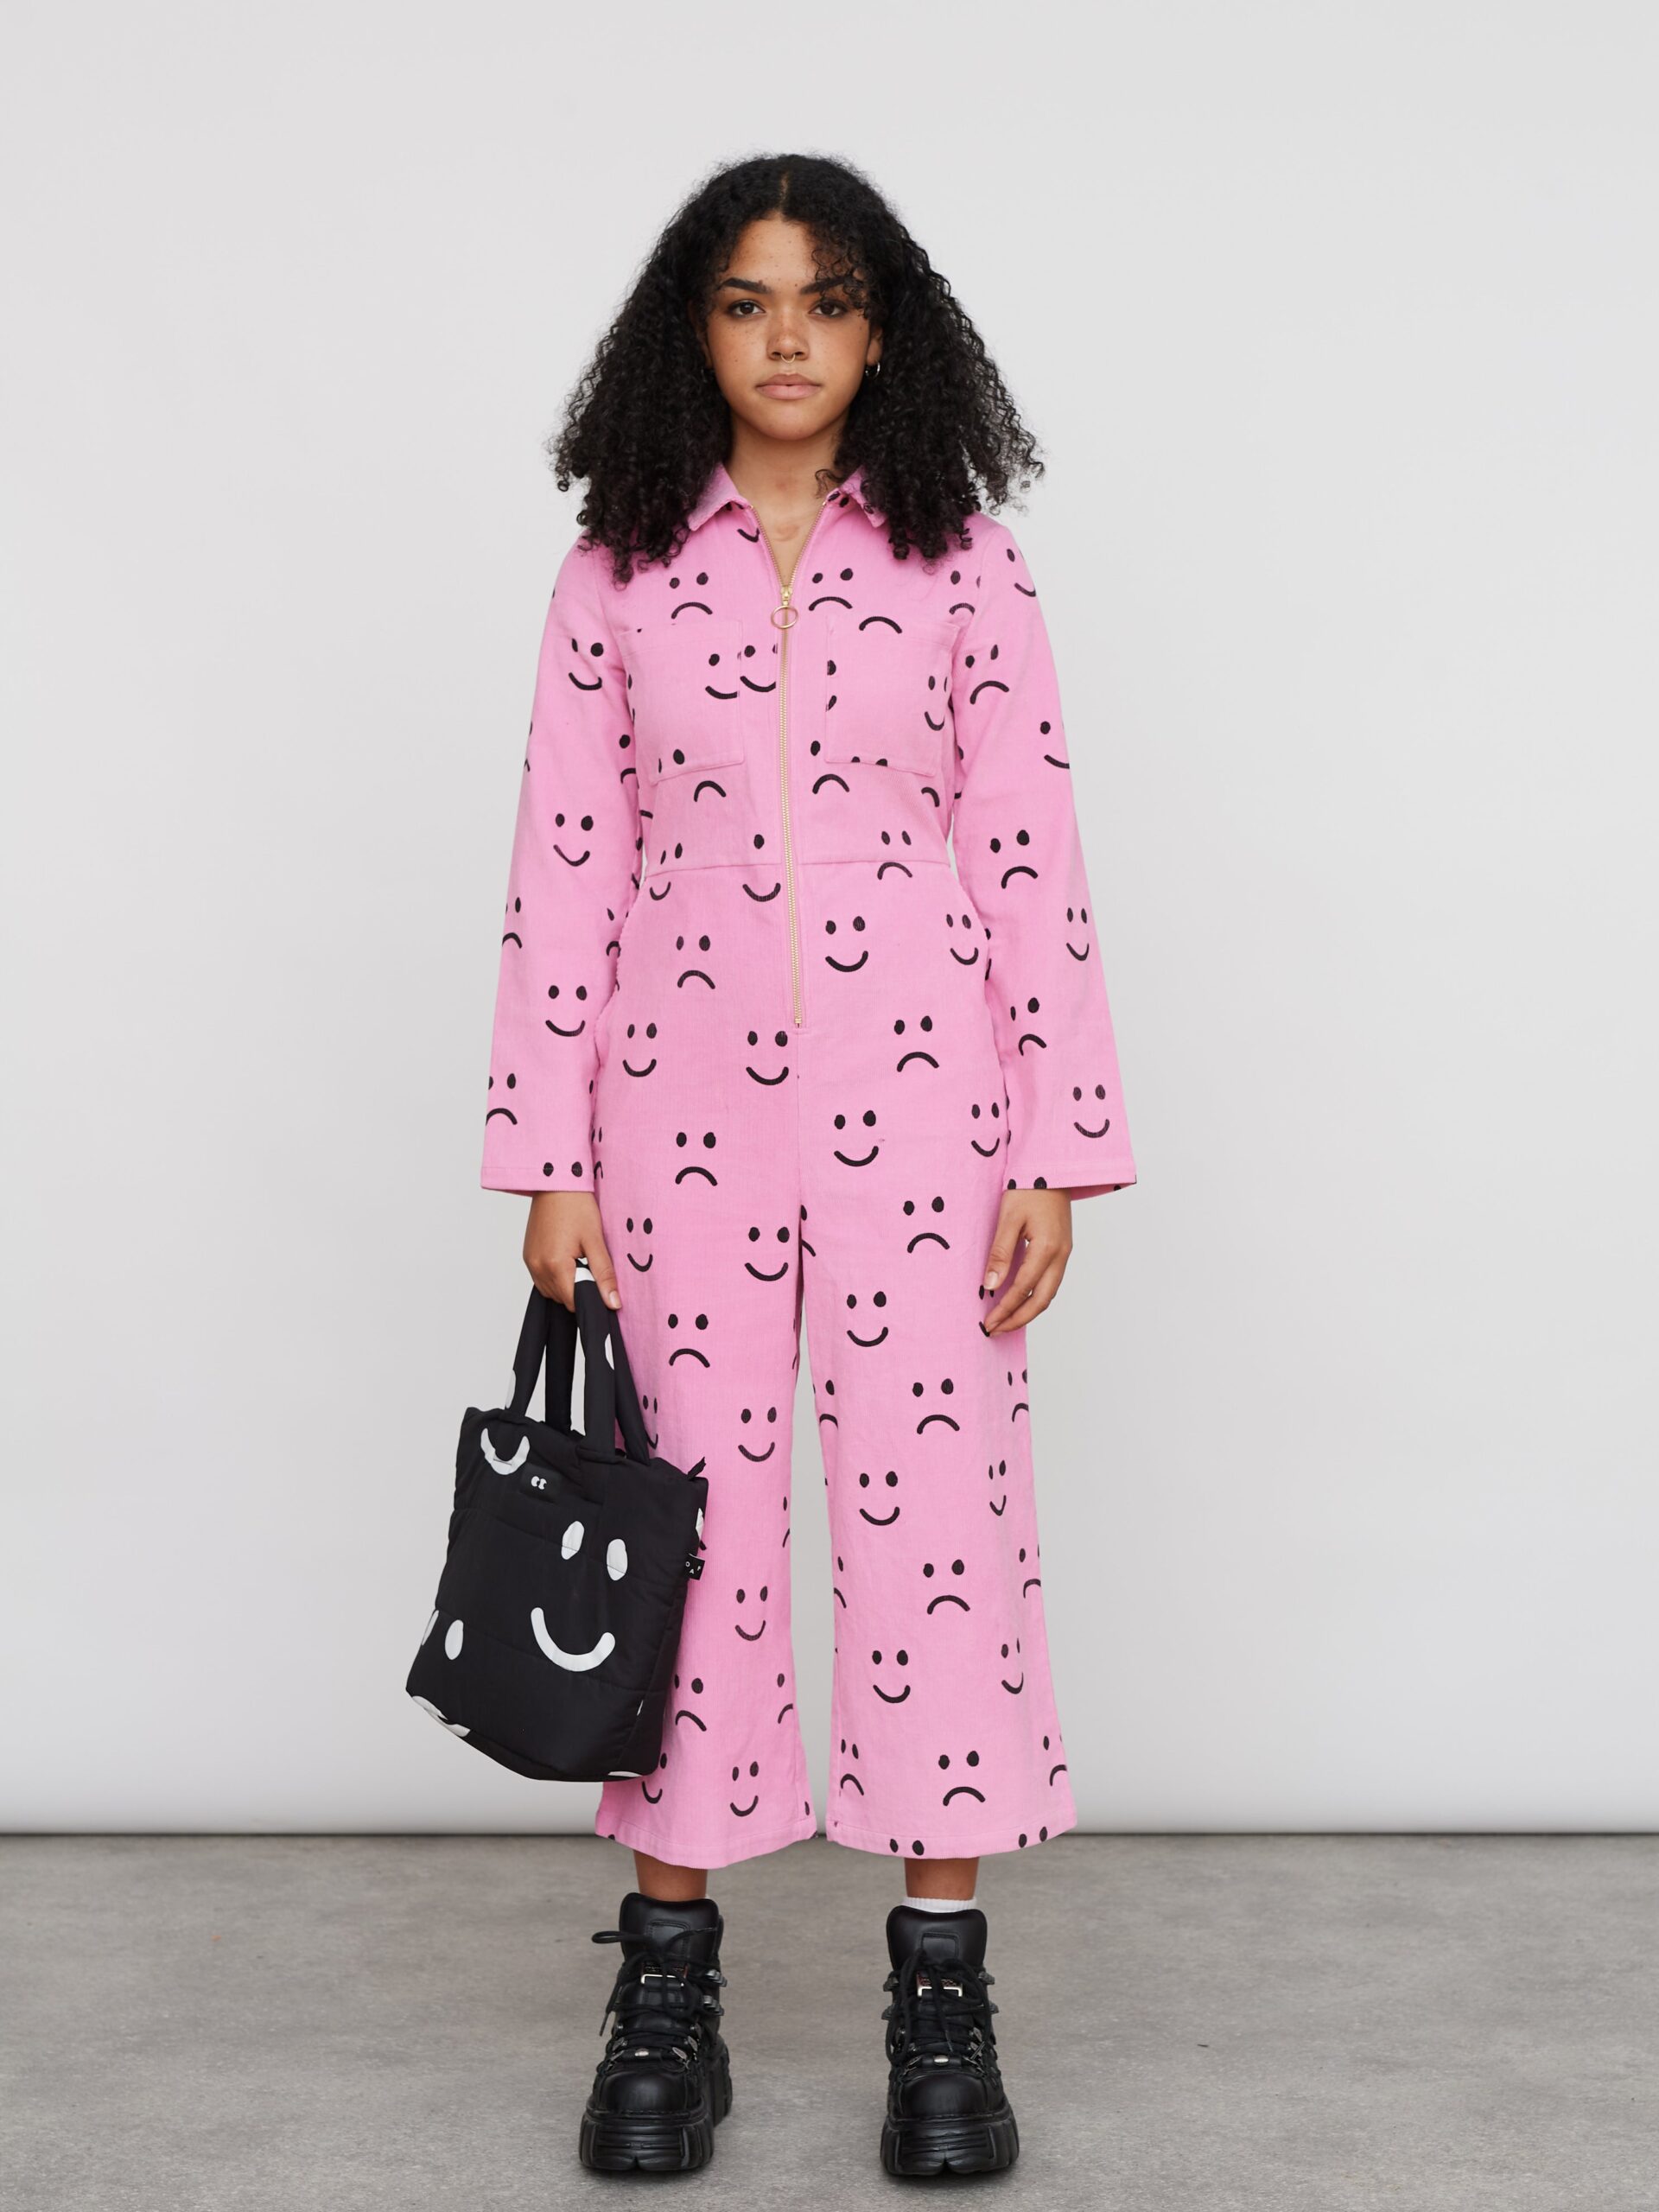 Only 39.00 usd for Happy Sad Cord Jumpsuit Online at the Shop